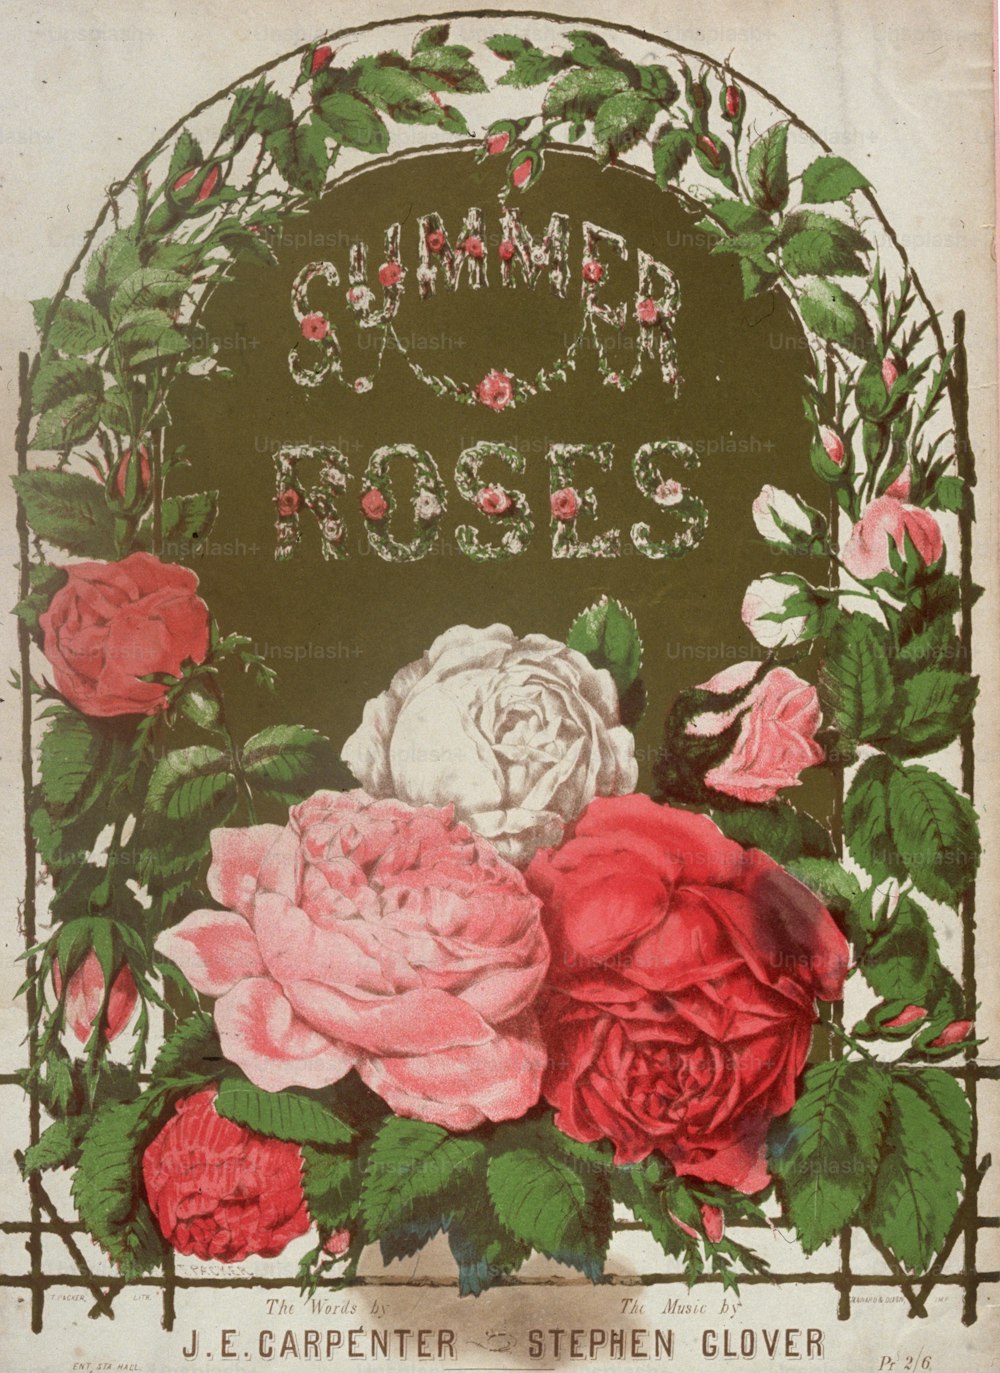 circa 1890:  The front cover of the score for the song Summer Roses written by Stephen Glover with lyrics by J E Carpenter.  (Photo by Hulton Archive/Getty Images)